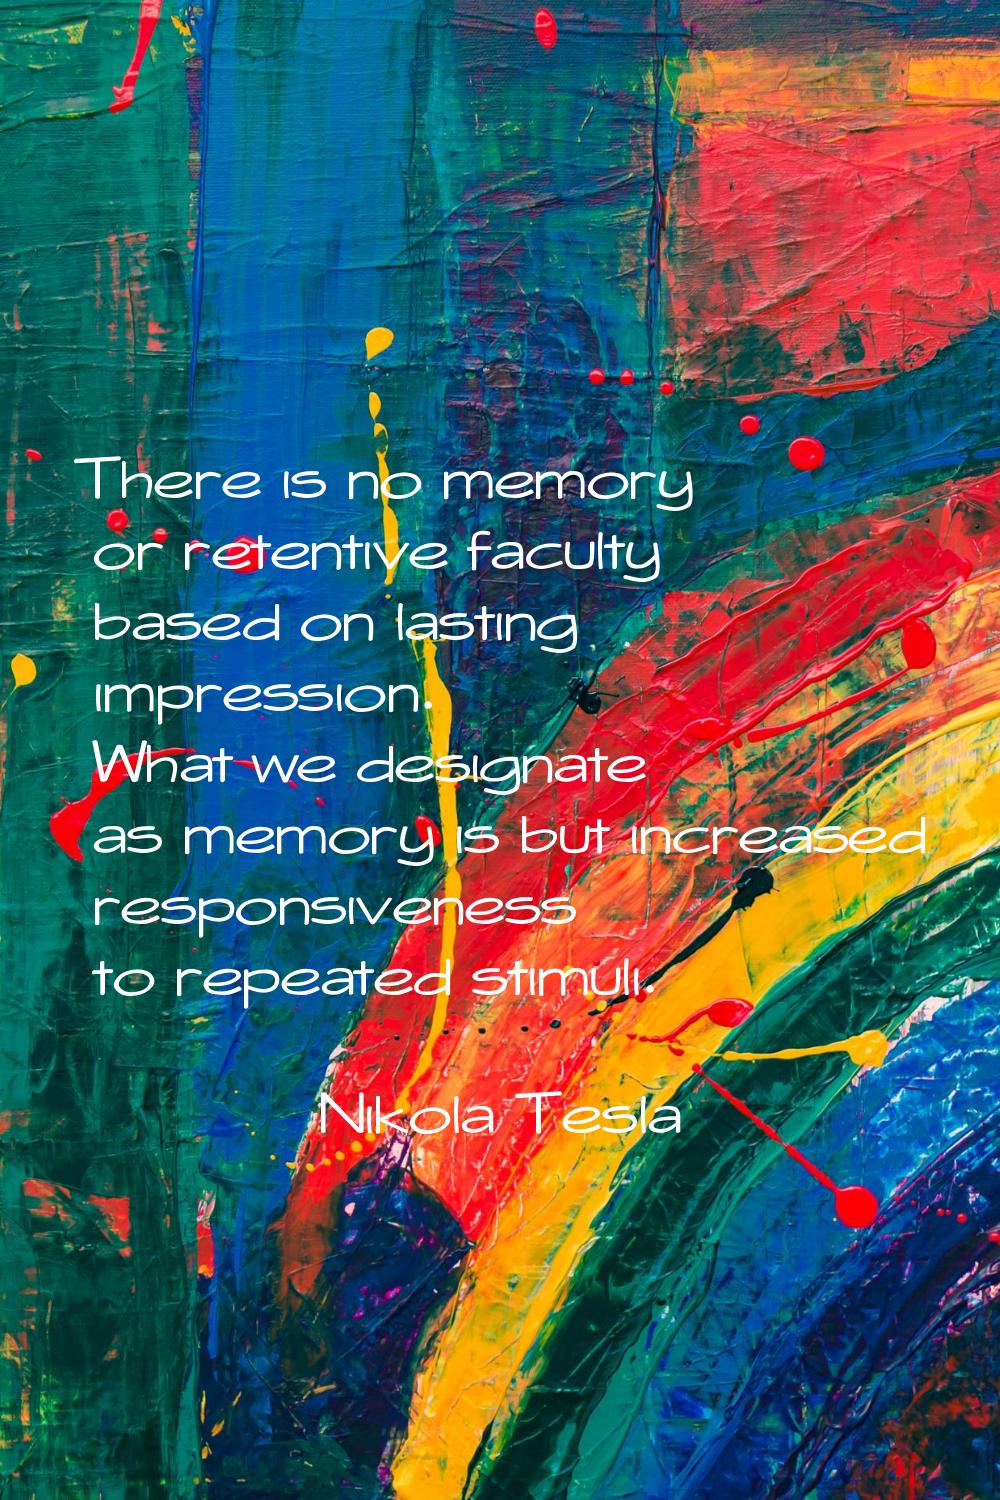 There is no memory or retentive faculty based on lasting impression. What we designate as memory is